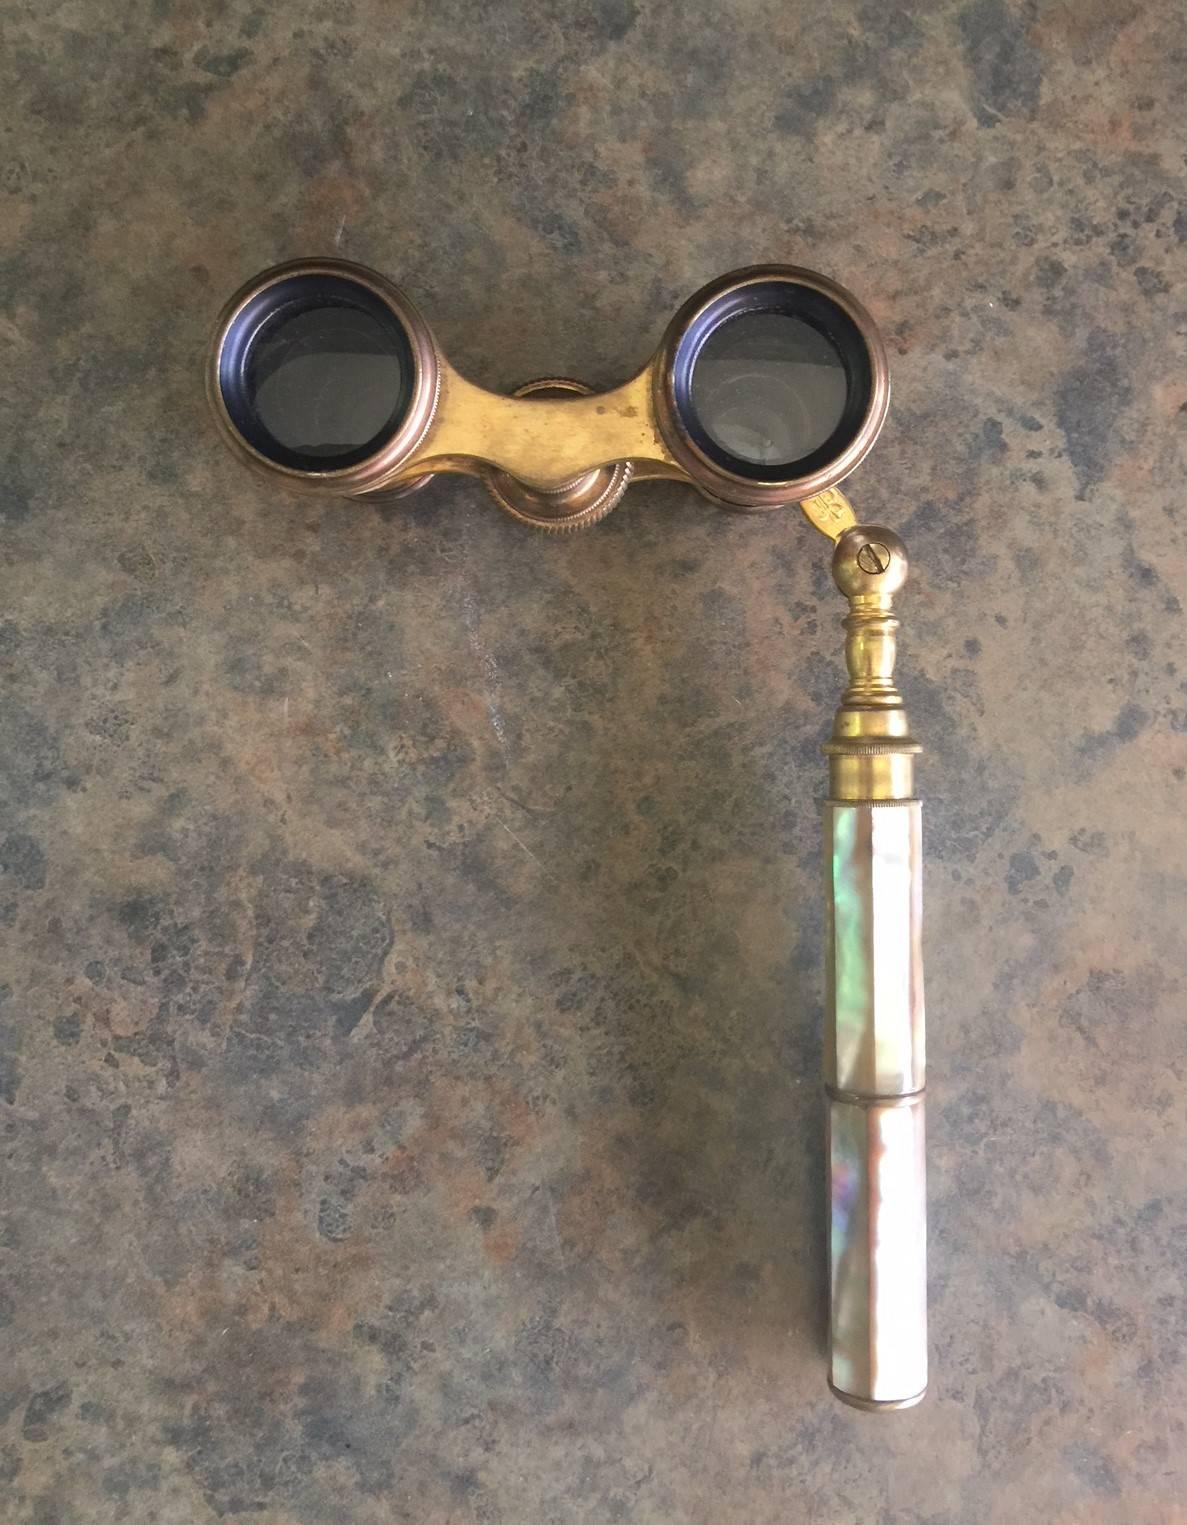 Fabulous vintage mother-of-pearl and brass opera glasses made by Chevalier in Paris. 

Complete functional glasses, the lenses may need some cleaning but this does not affect the clear view; focus bar works great. This stunning pair would look